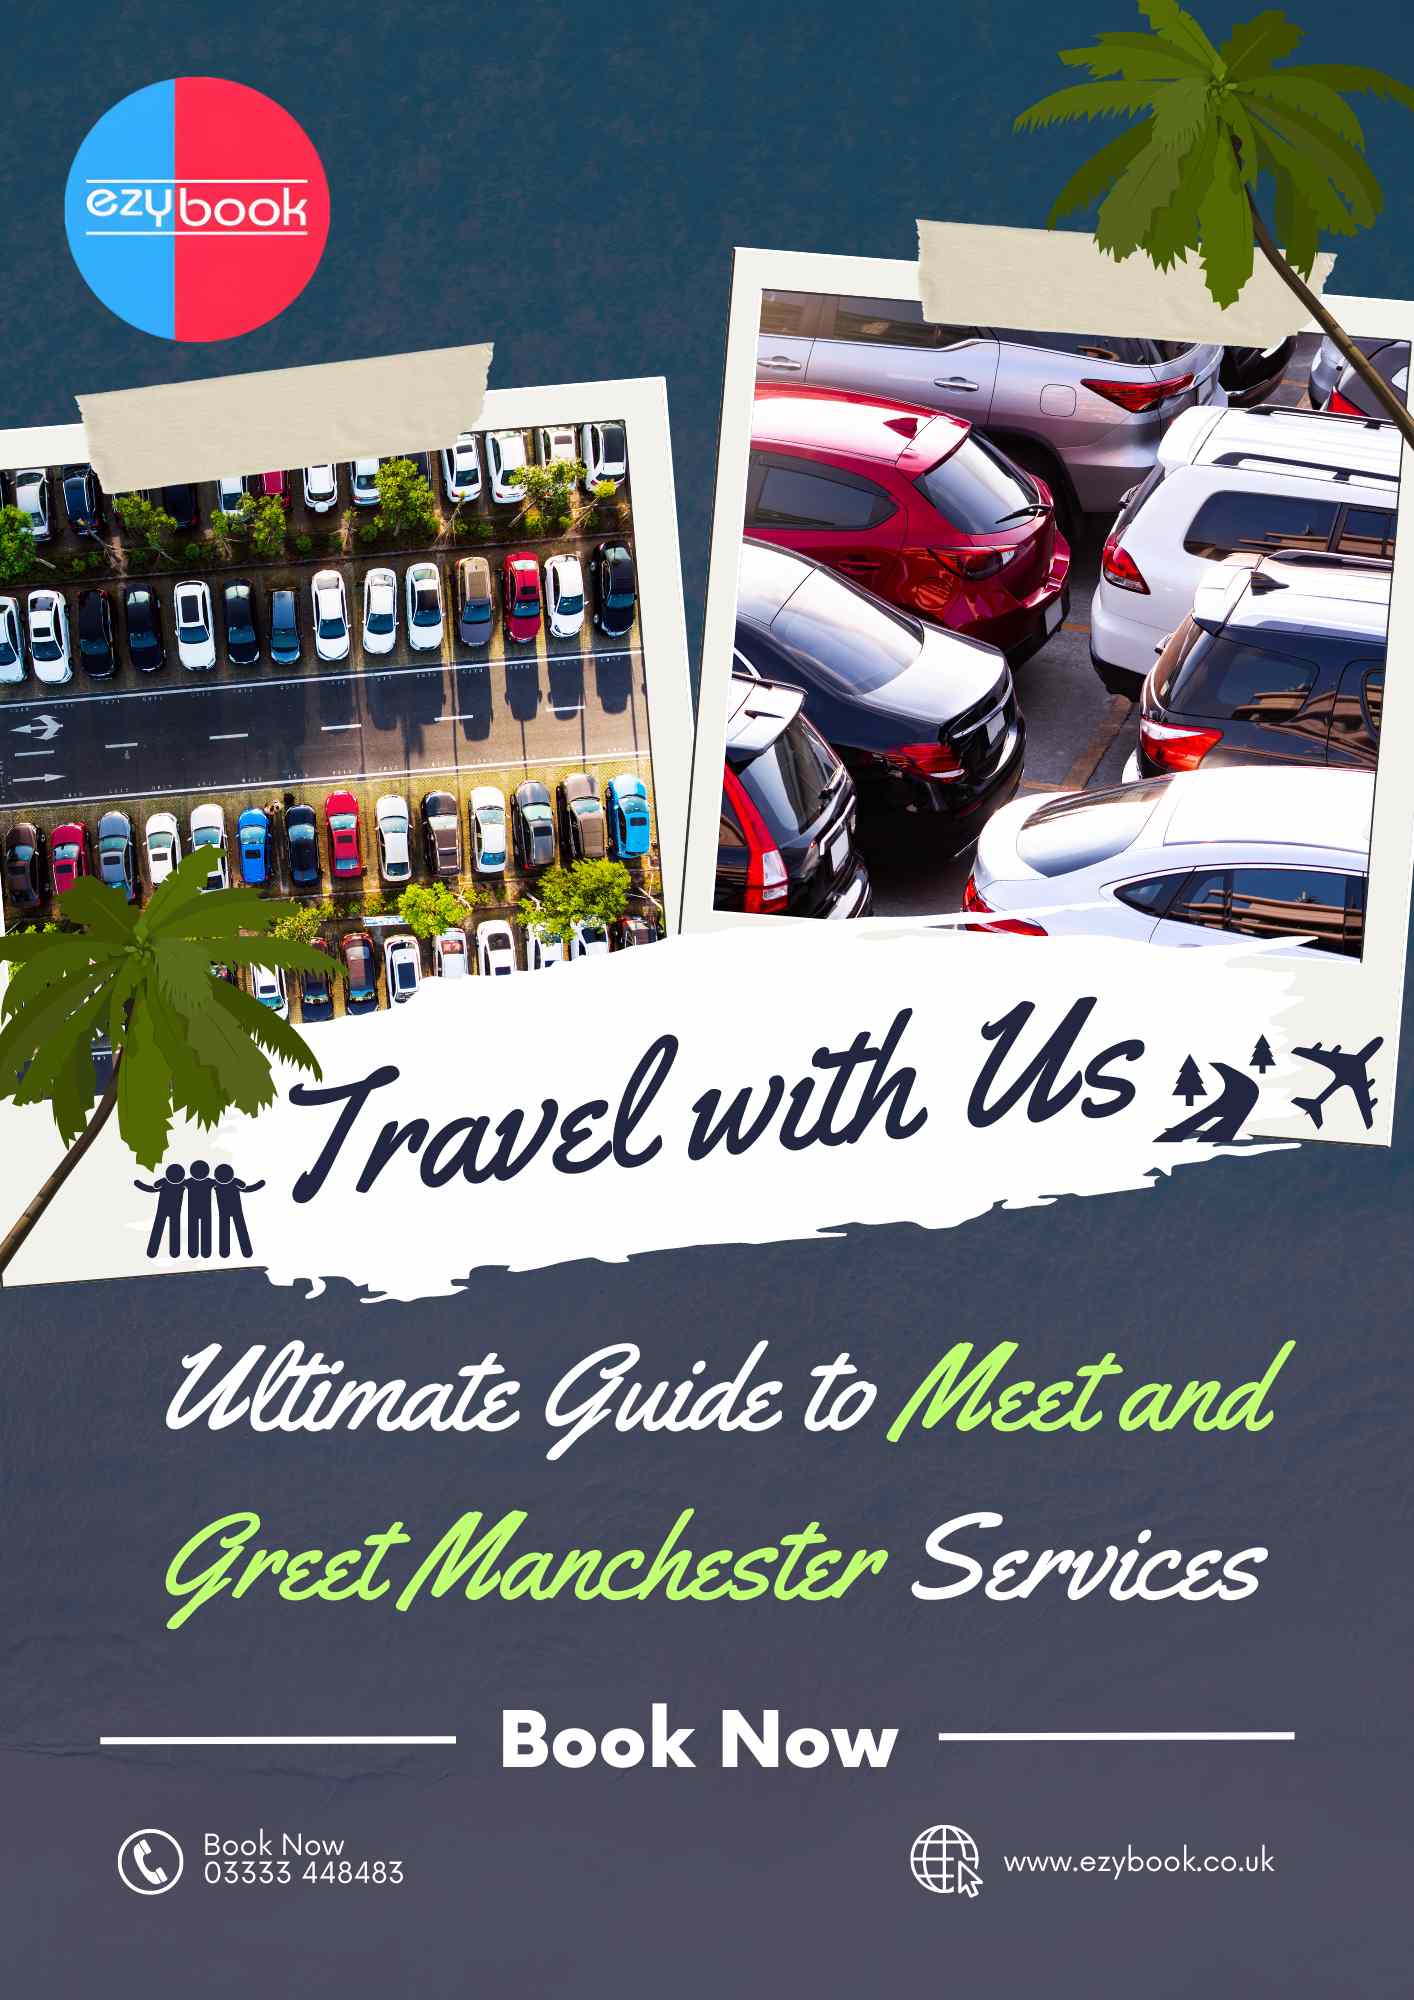 Exclusive Meet And Greet Service At Manchester Airport